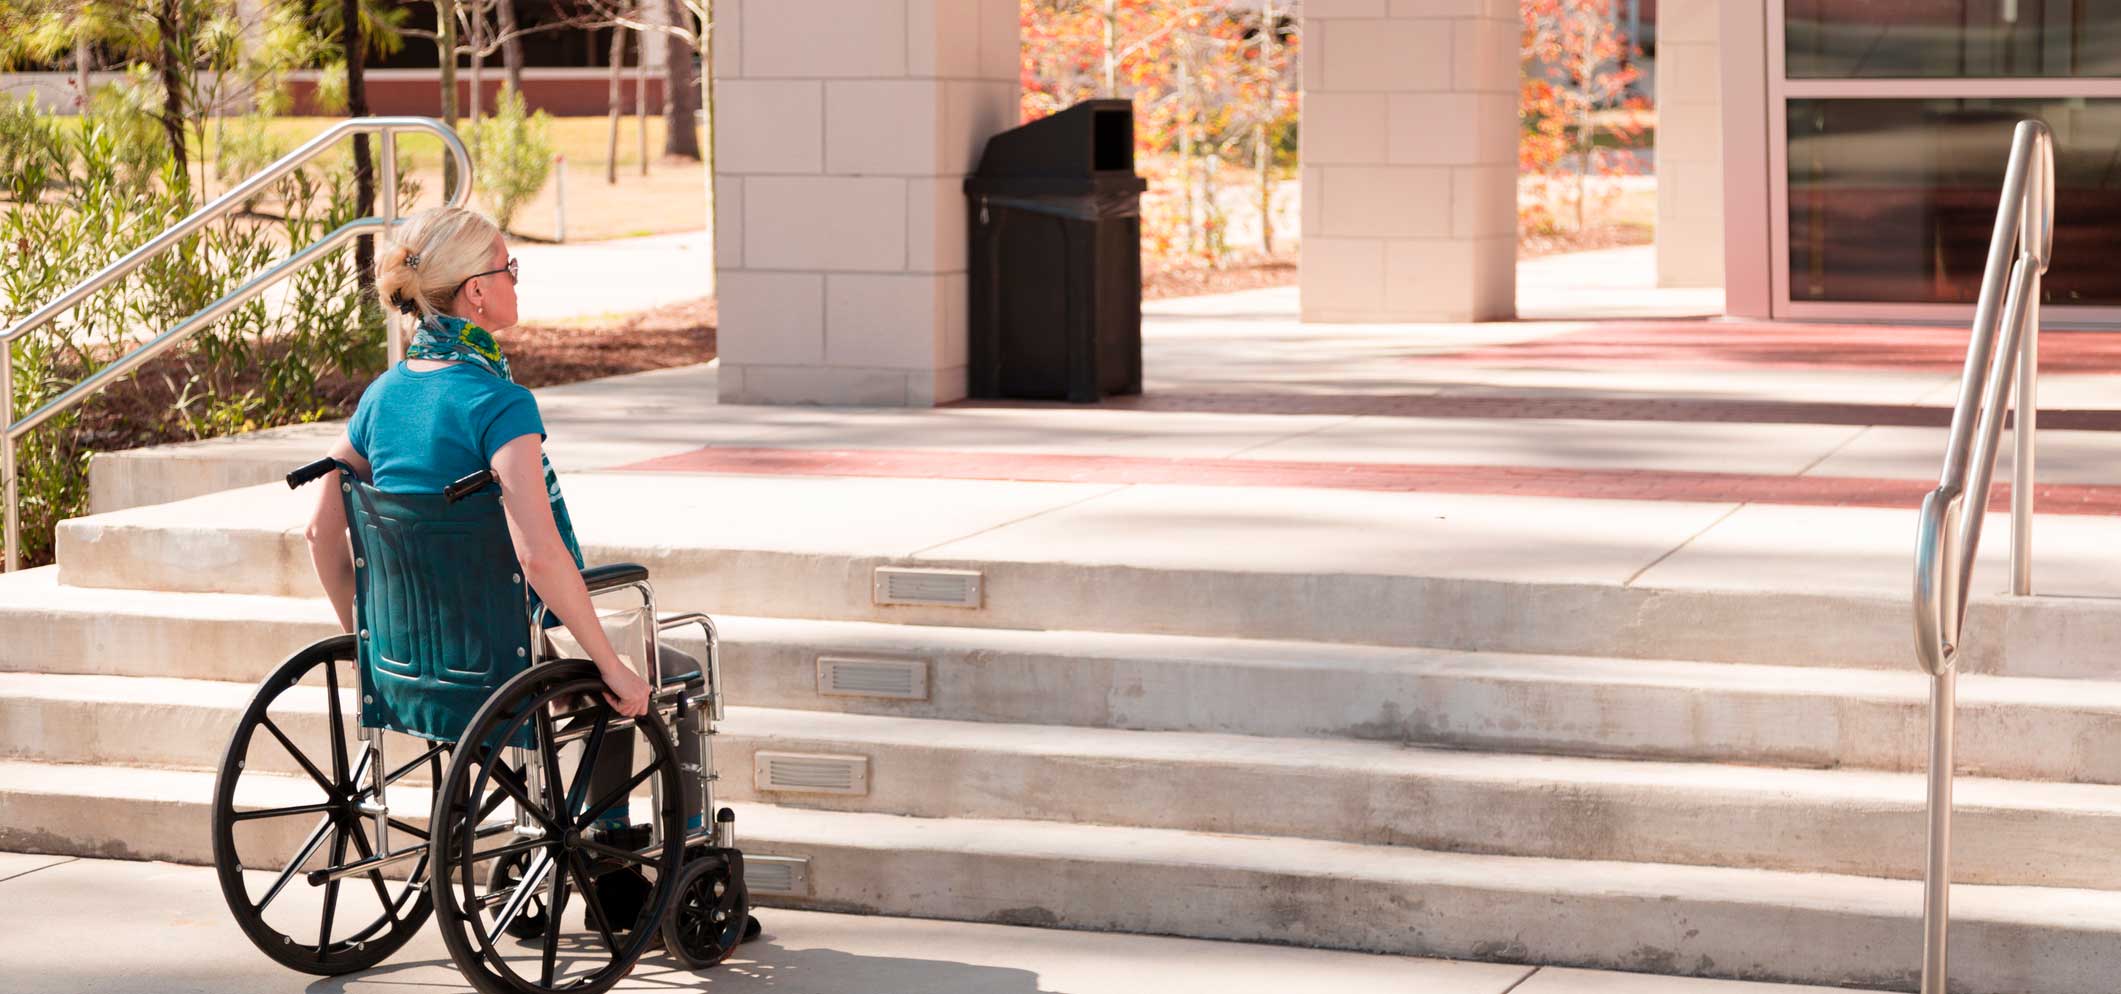 A women in a wheelchair at the bottom of some steps. The steps lead to the entrance of a building.